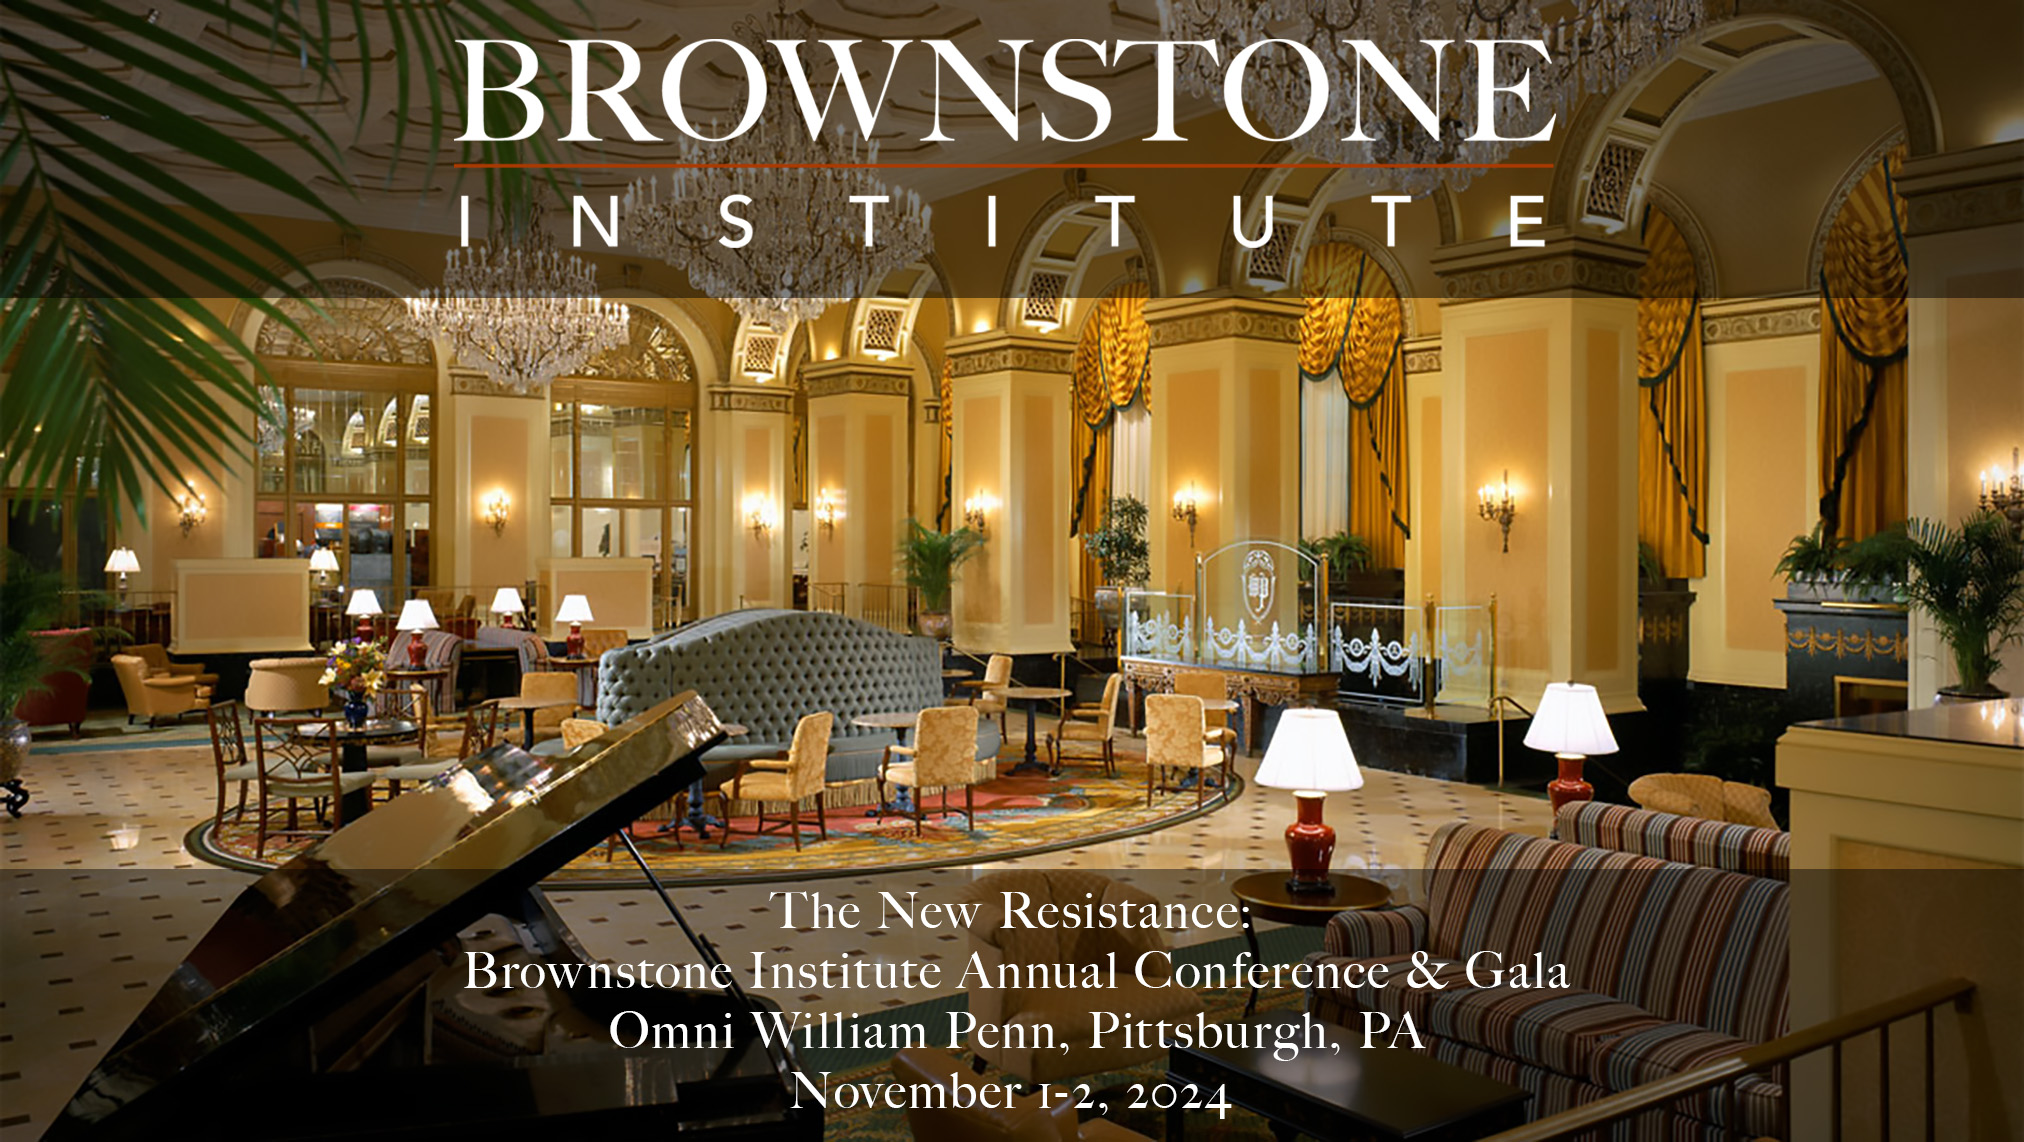 The New Resistance Brownstone Institute Annual Conference and Gala